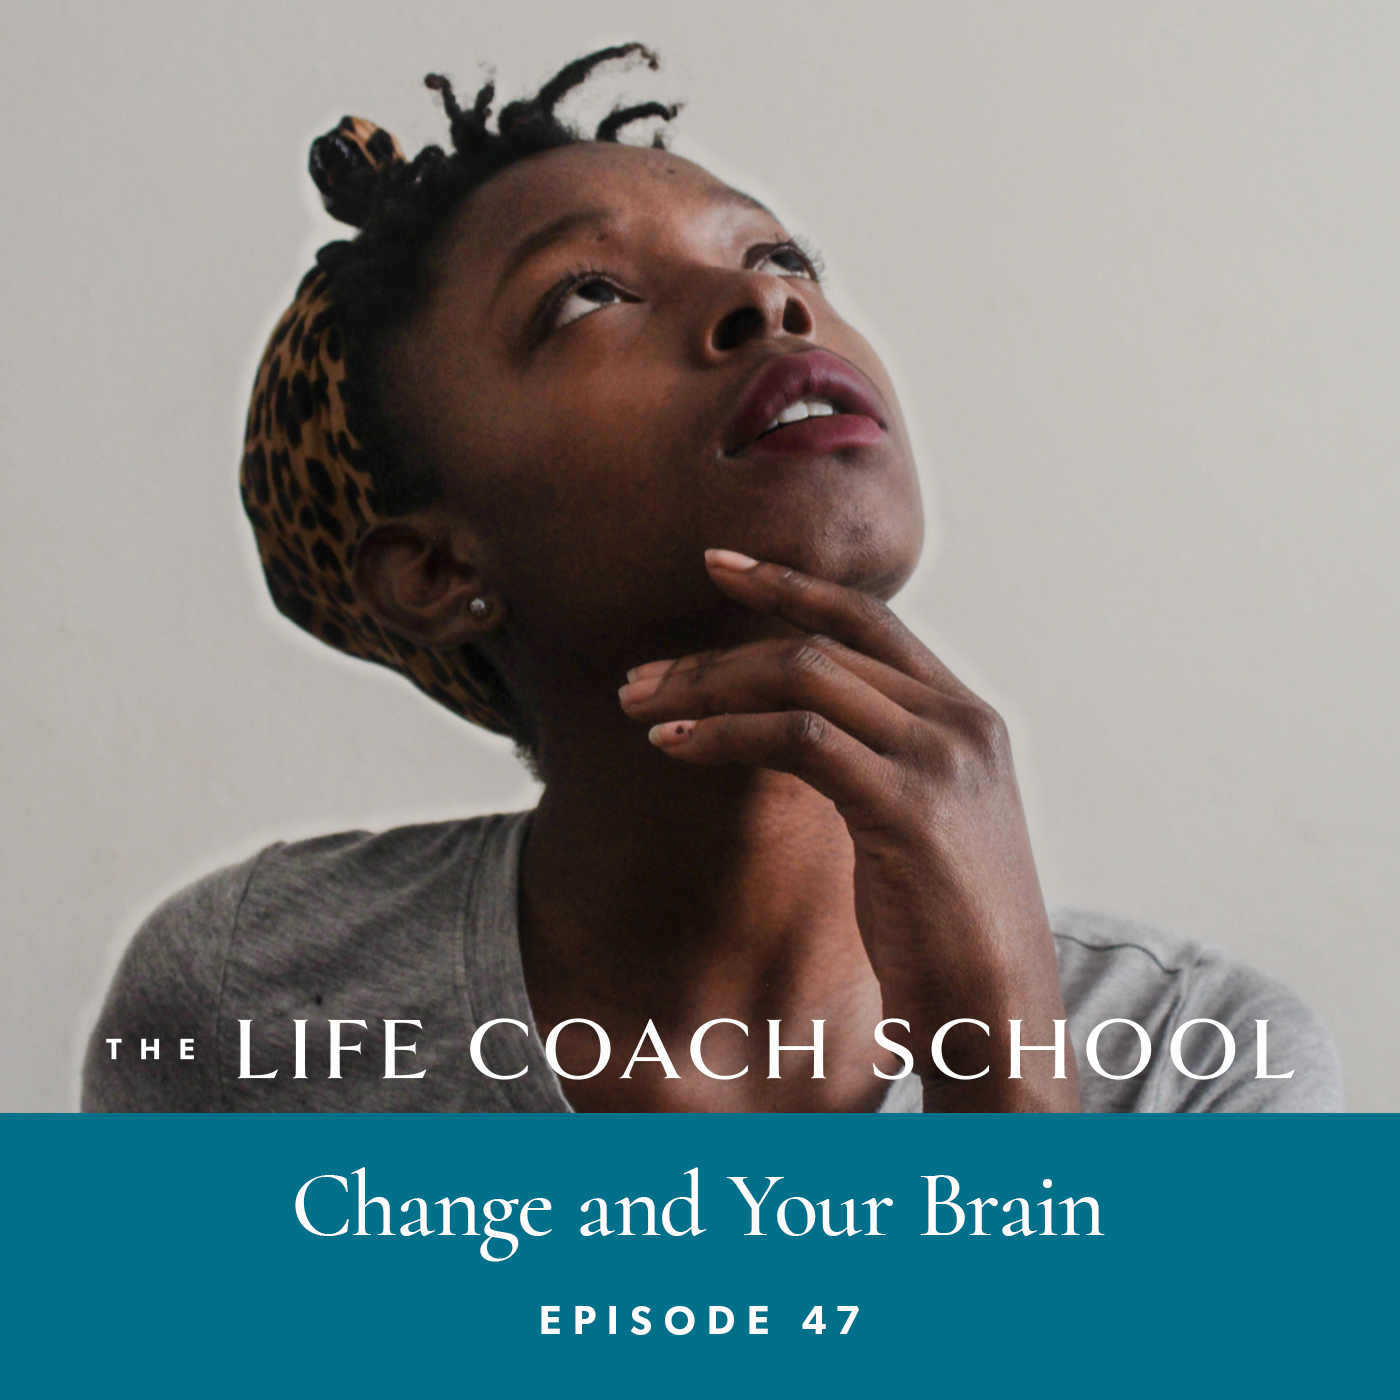 The Life Coach School Podcast with Brooke Castillo | Episode 47 | Change and Your Brain